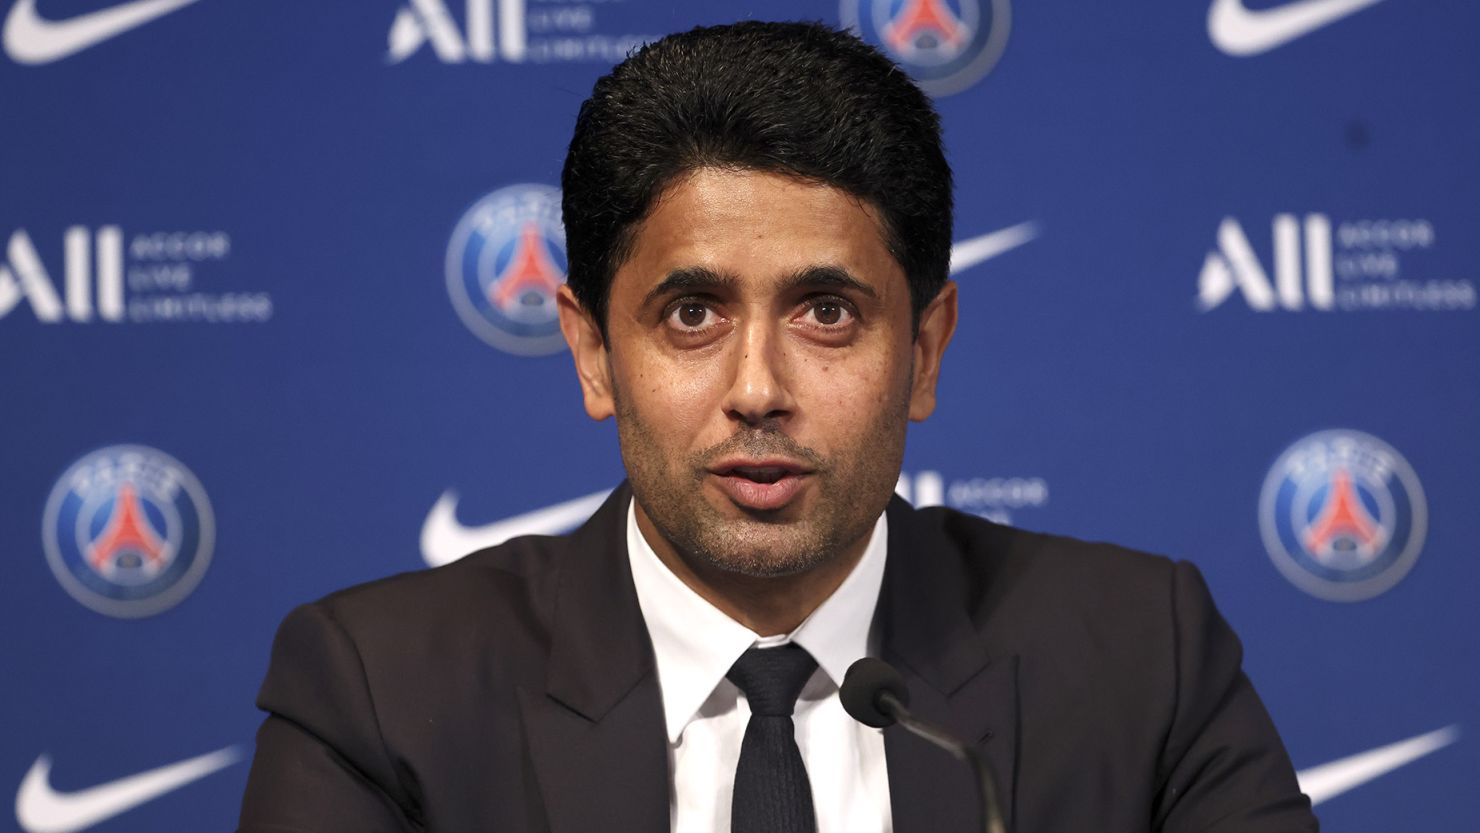 President of PSG Nasser Al-Khelaifi during a press conference on May 23, 2022, in Paris, France.